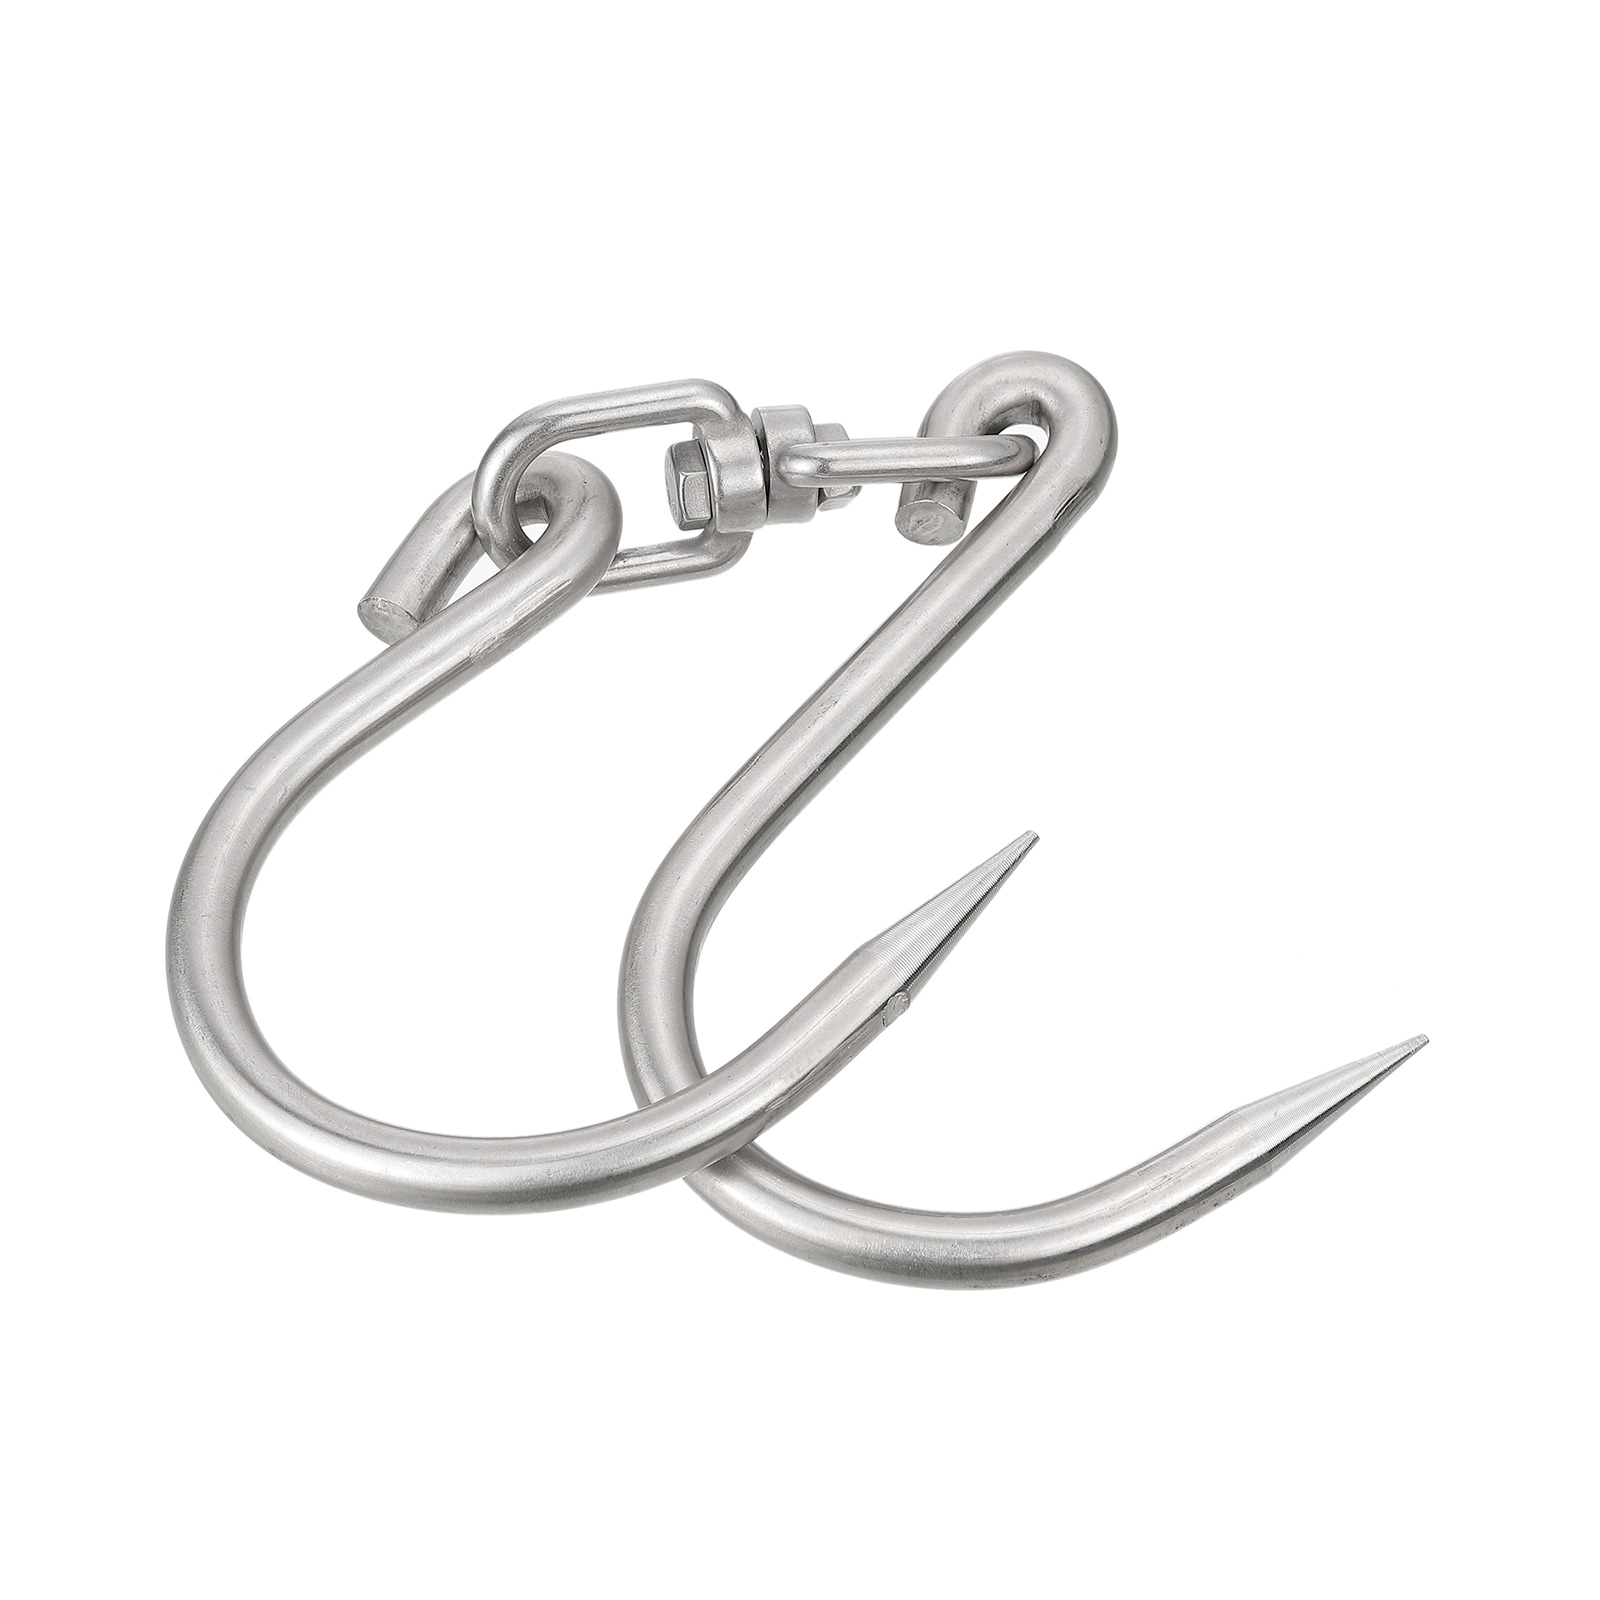 14.5 Double Meat Hooks, 0.47 Thickness Stainless Steel Swivel Meat Hook -  Silver Tone - Bed Bath & Beyond - 37501337